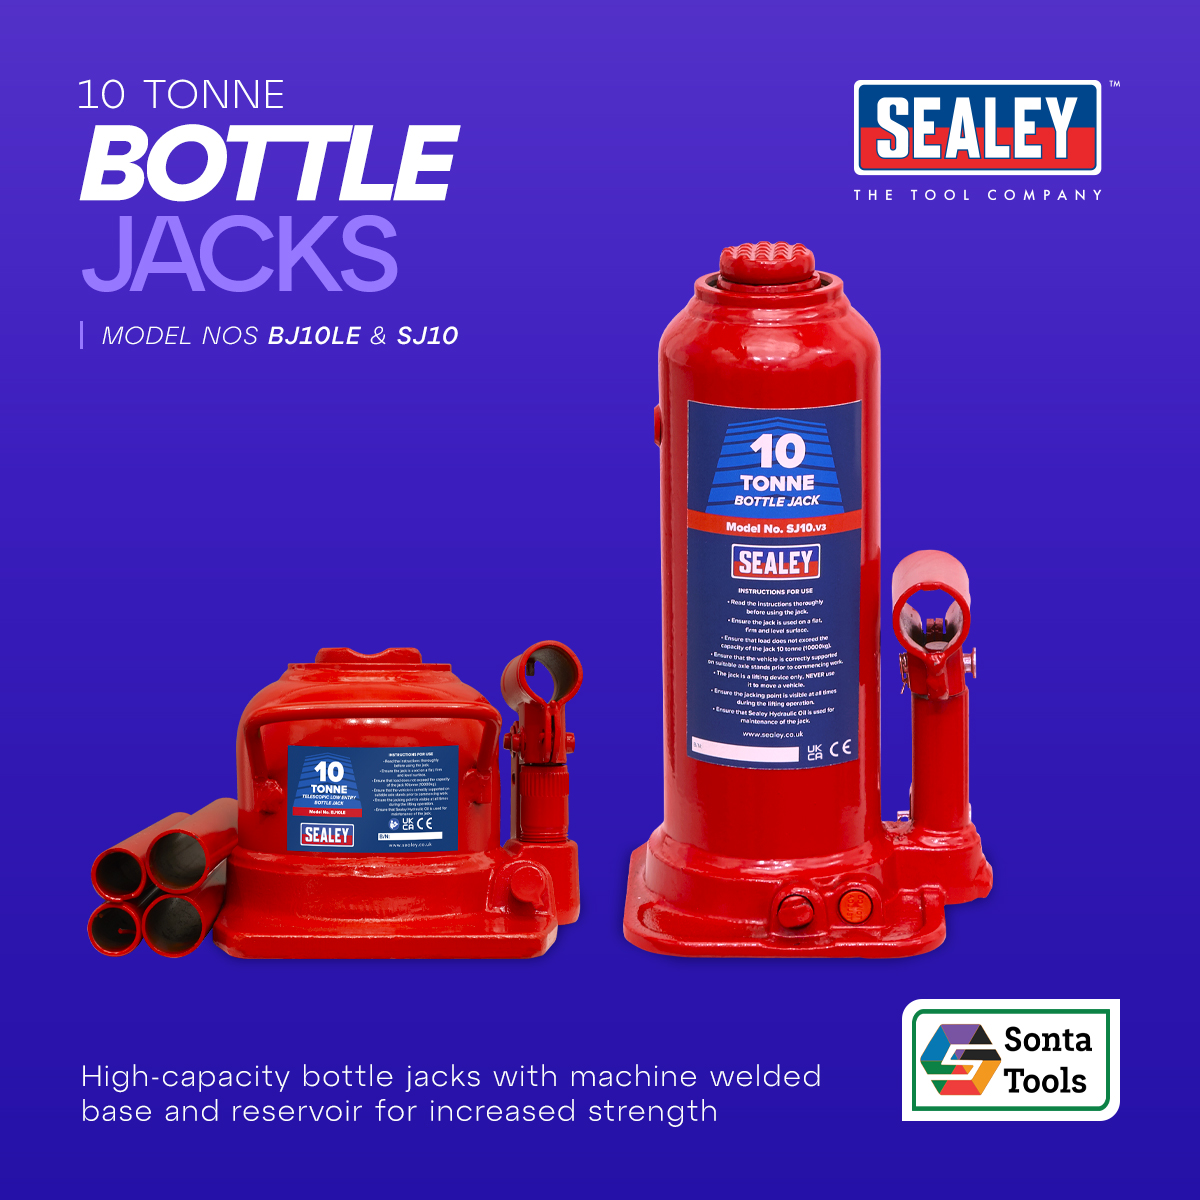 Jack Sealey Bottle Jacks, are a must-have for every #workshop. #reliable and #durable.
SontaSolutions.com

#sontasolutions #sontatools #sonta #automotive #mro #maintenance #innovation #creativity #handtools #premiumquality #professionals #uae
#solutionsprovider